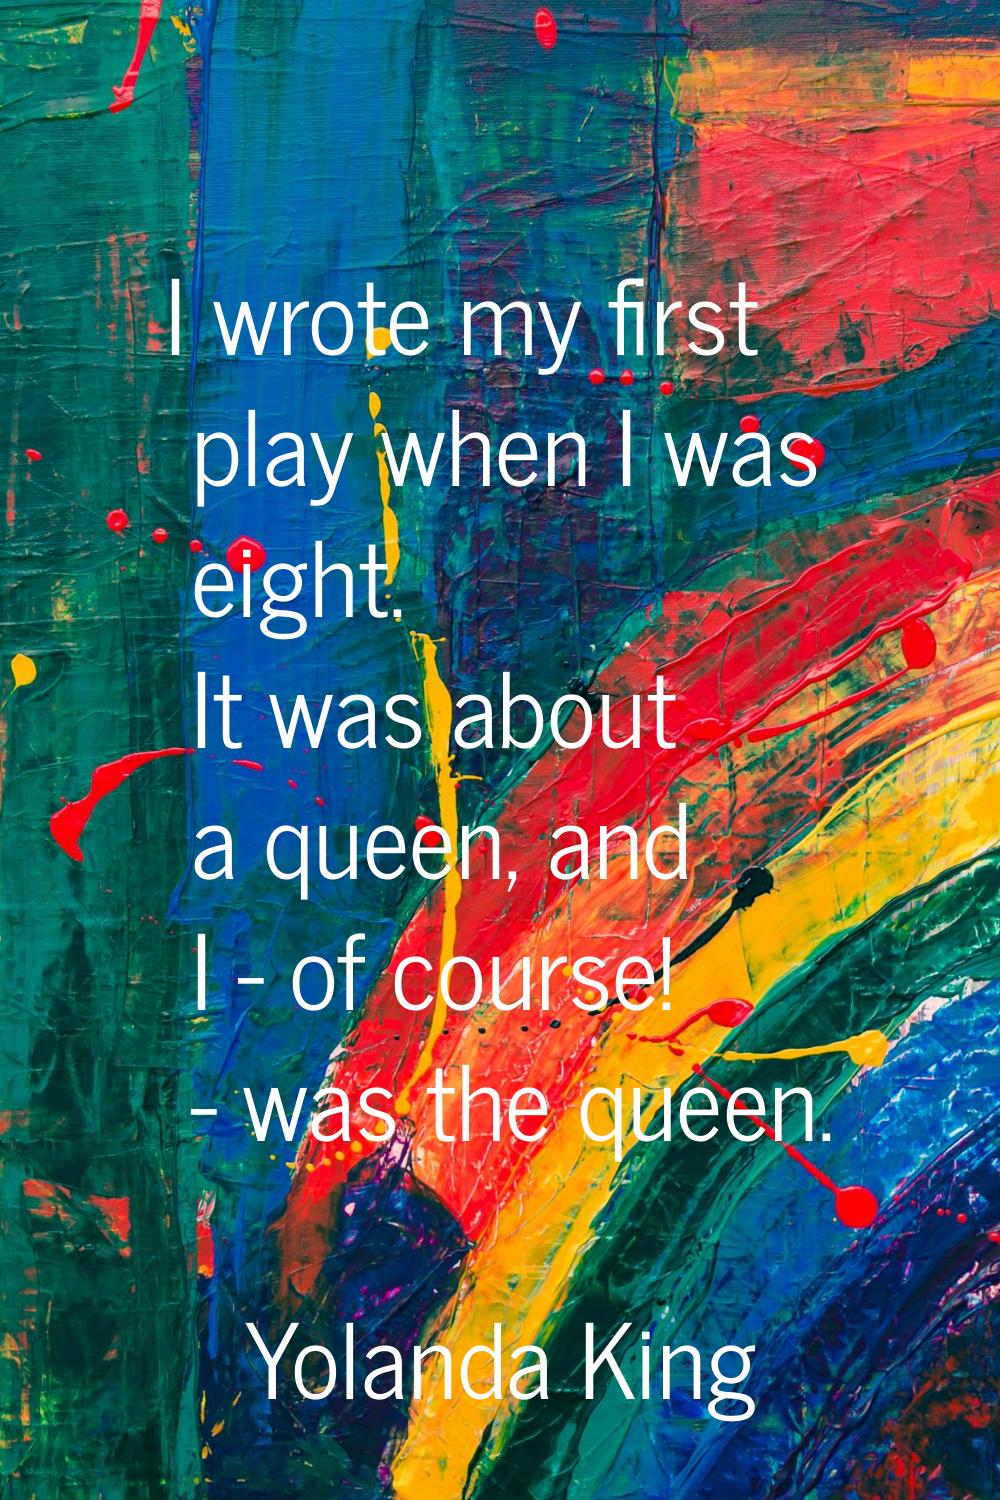 I wrote my first play when I was eight. It was about a queen, and I - of course! - was the queen.